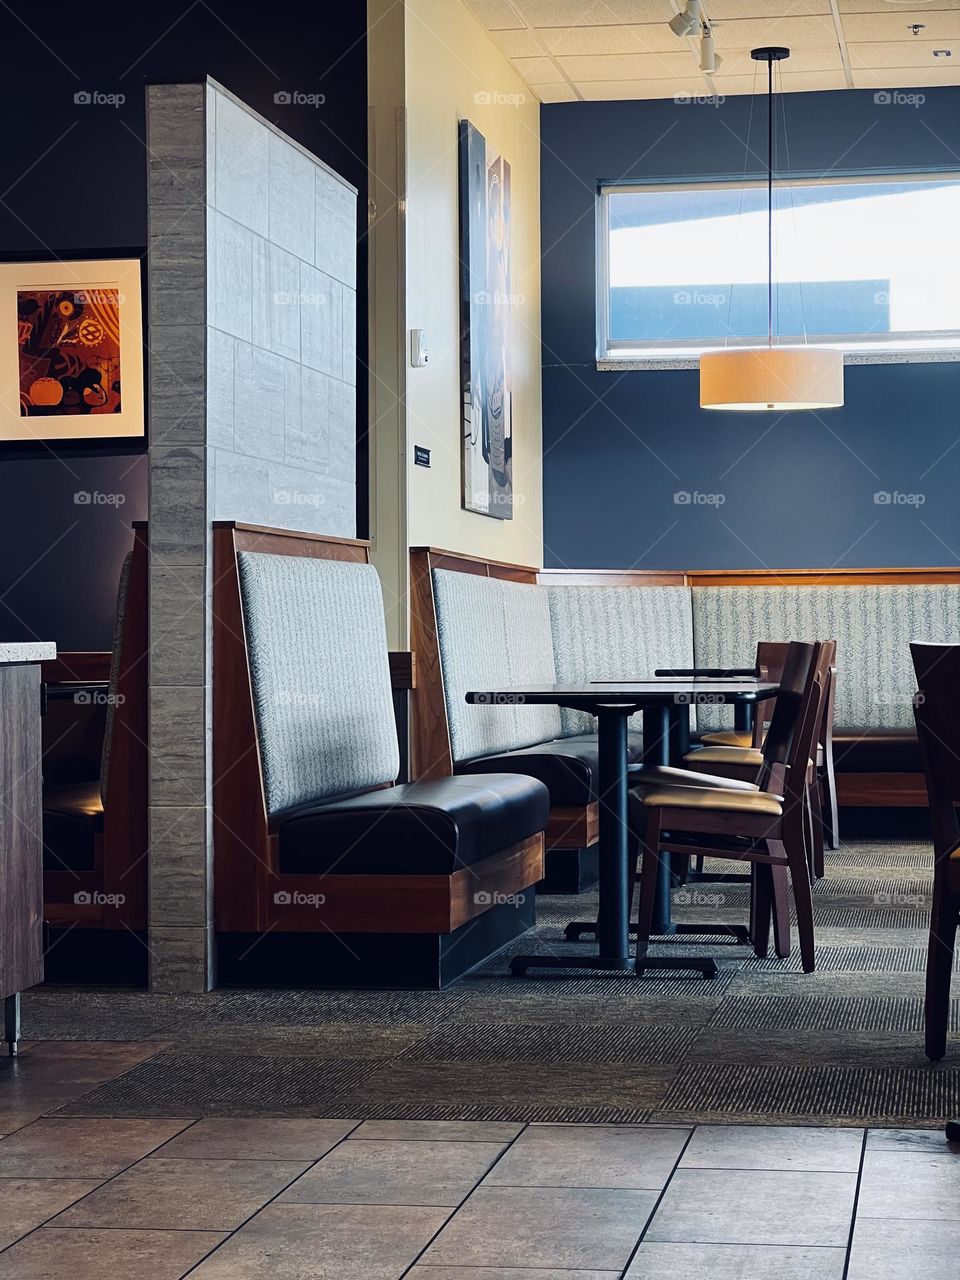 Simple lines and wooden furniture of cafe interior. Drop lighting and natural light from high window, carpet and padded benches.